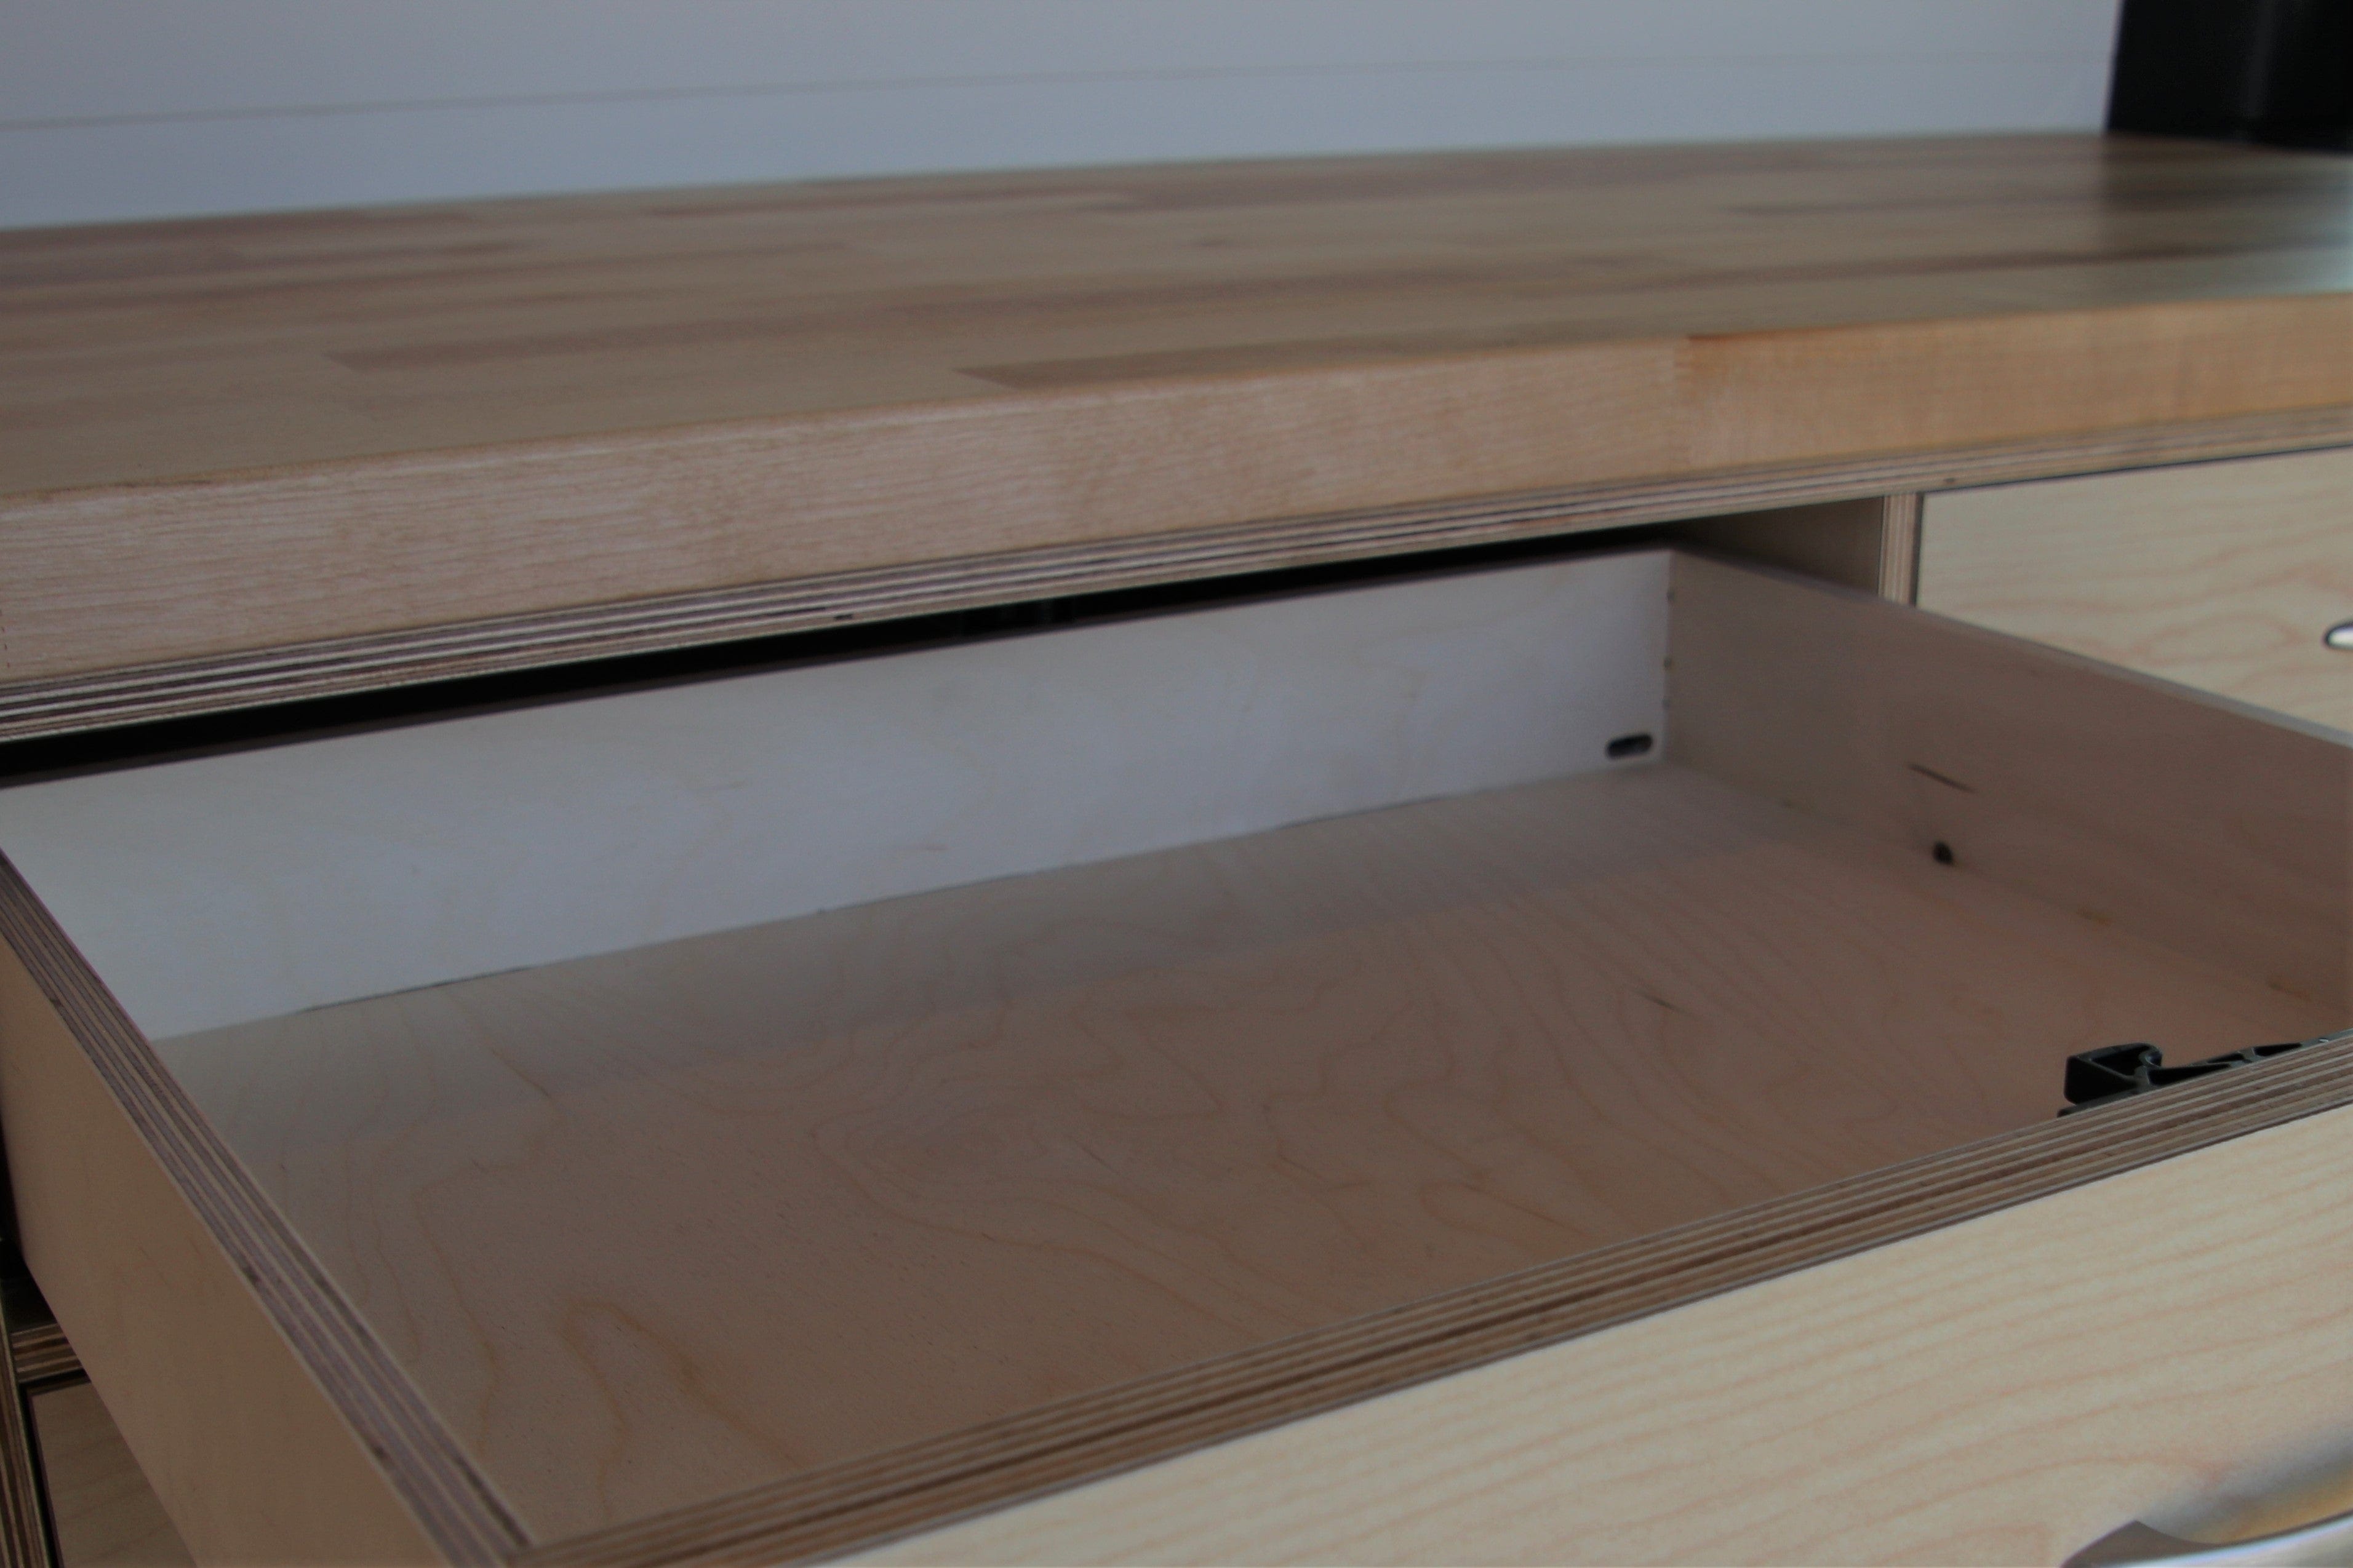  Galley Upper Storage Drawer for Conversion Vans like Sprinter and ProMaster - The Vansmith in Boulder, Colorado